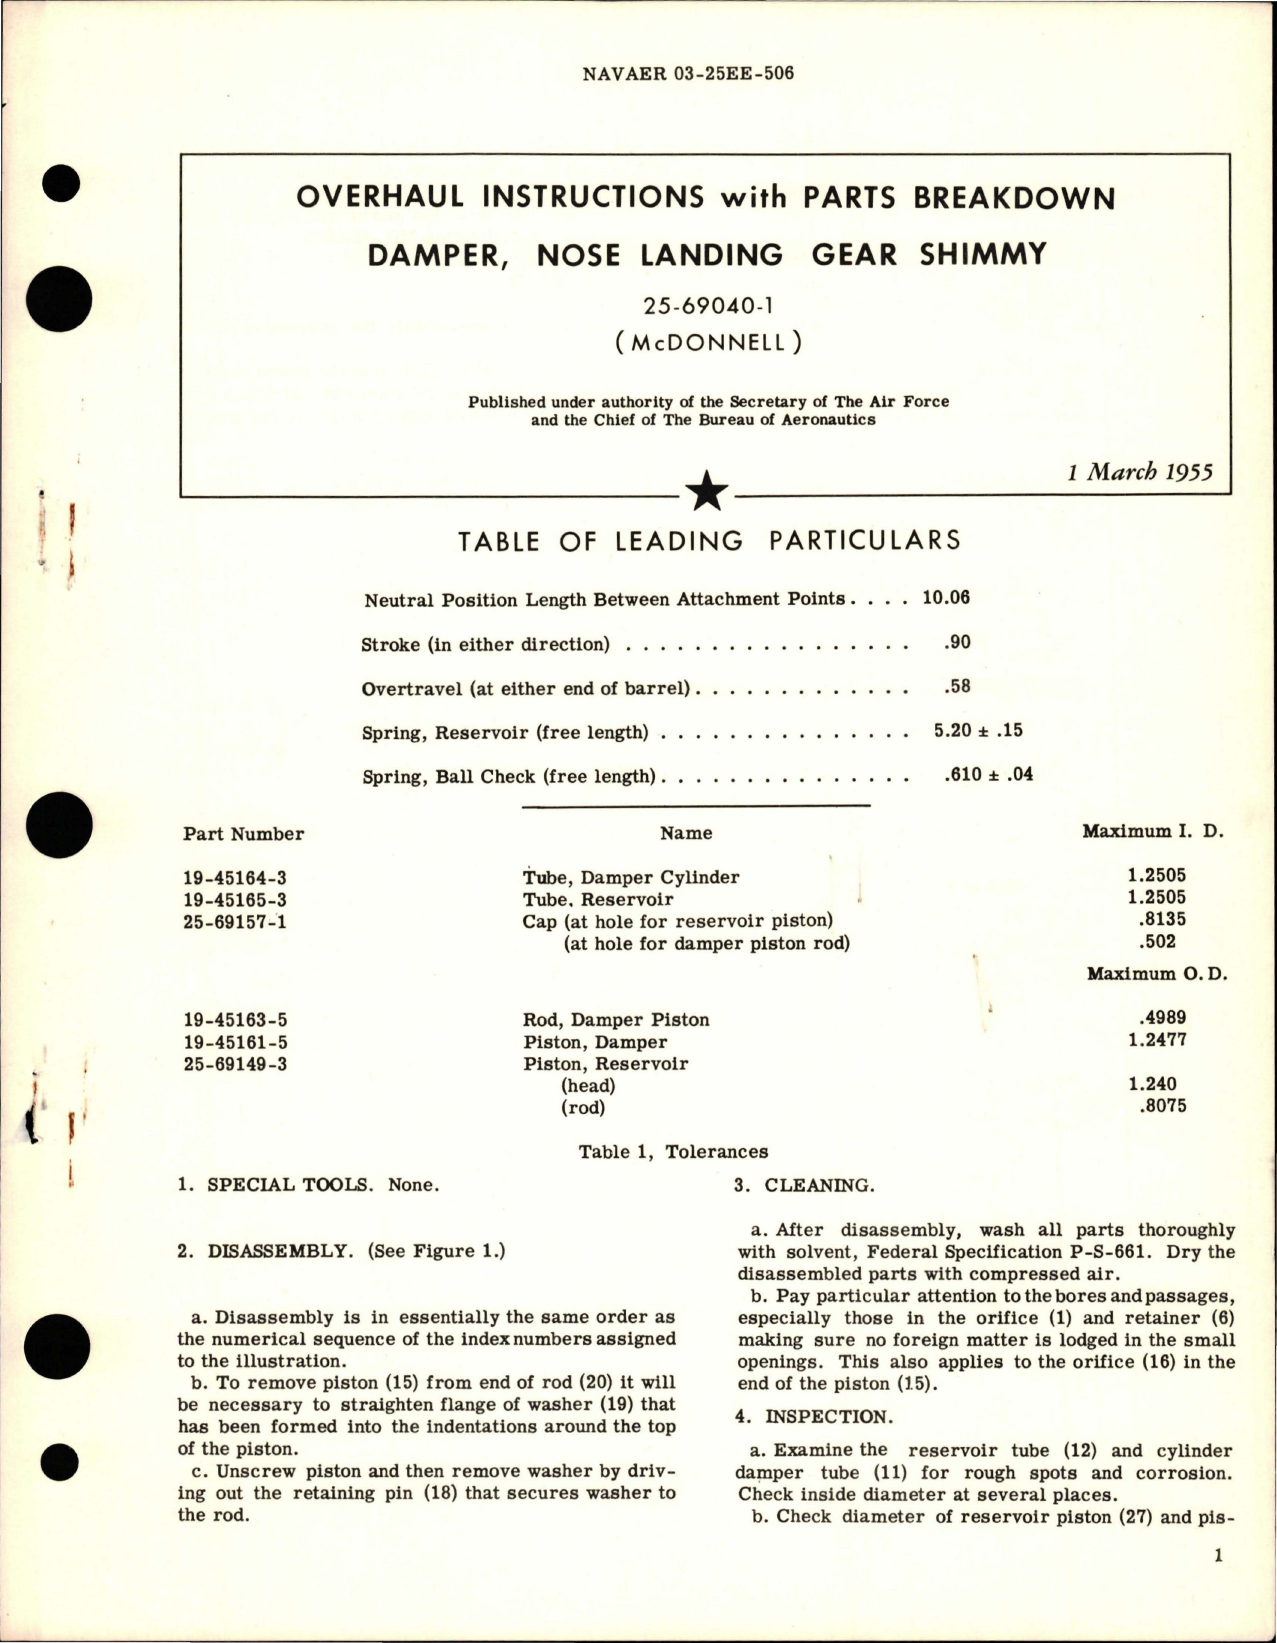 Sample page 1 from AirCorps Library document: Overhaul Instructions with Parts Breakdown for Nose Landing Gear Shimmy Damper - 25-69040-1